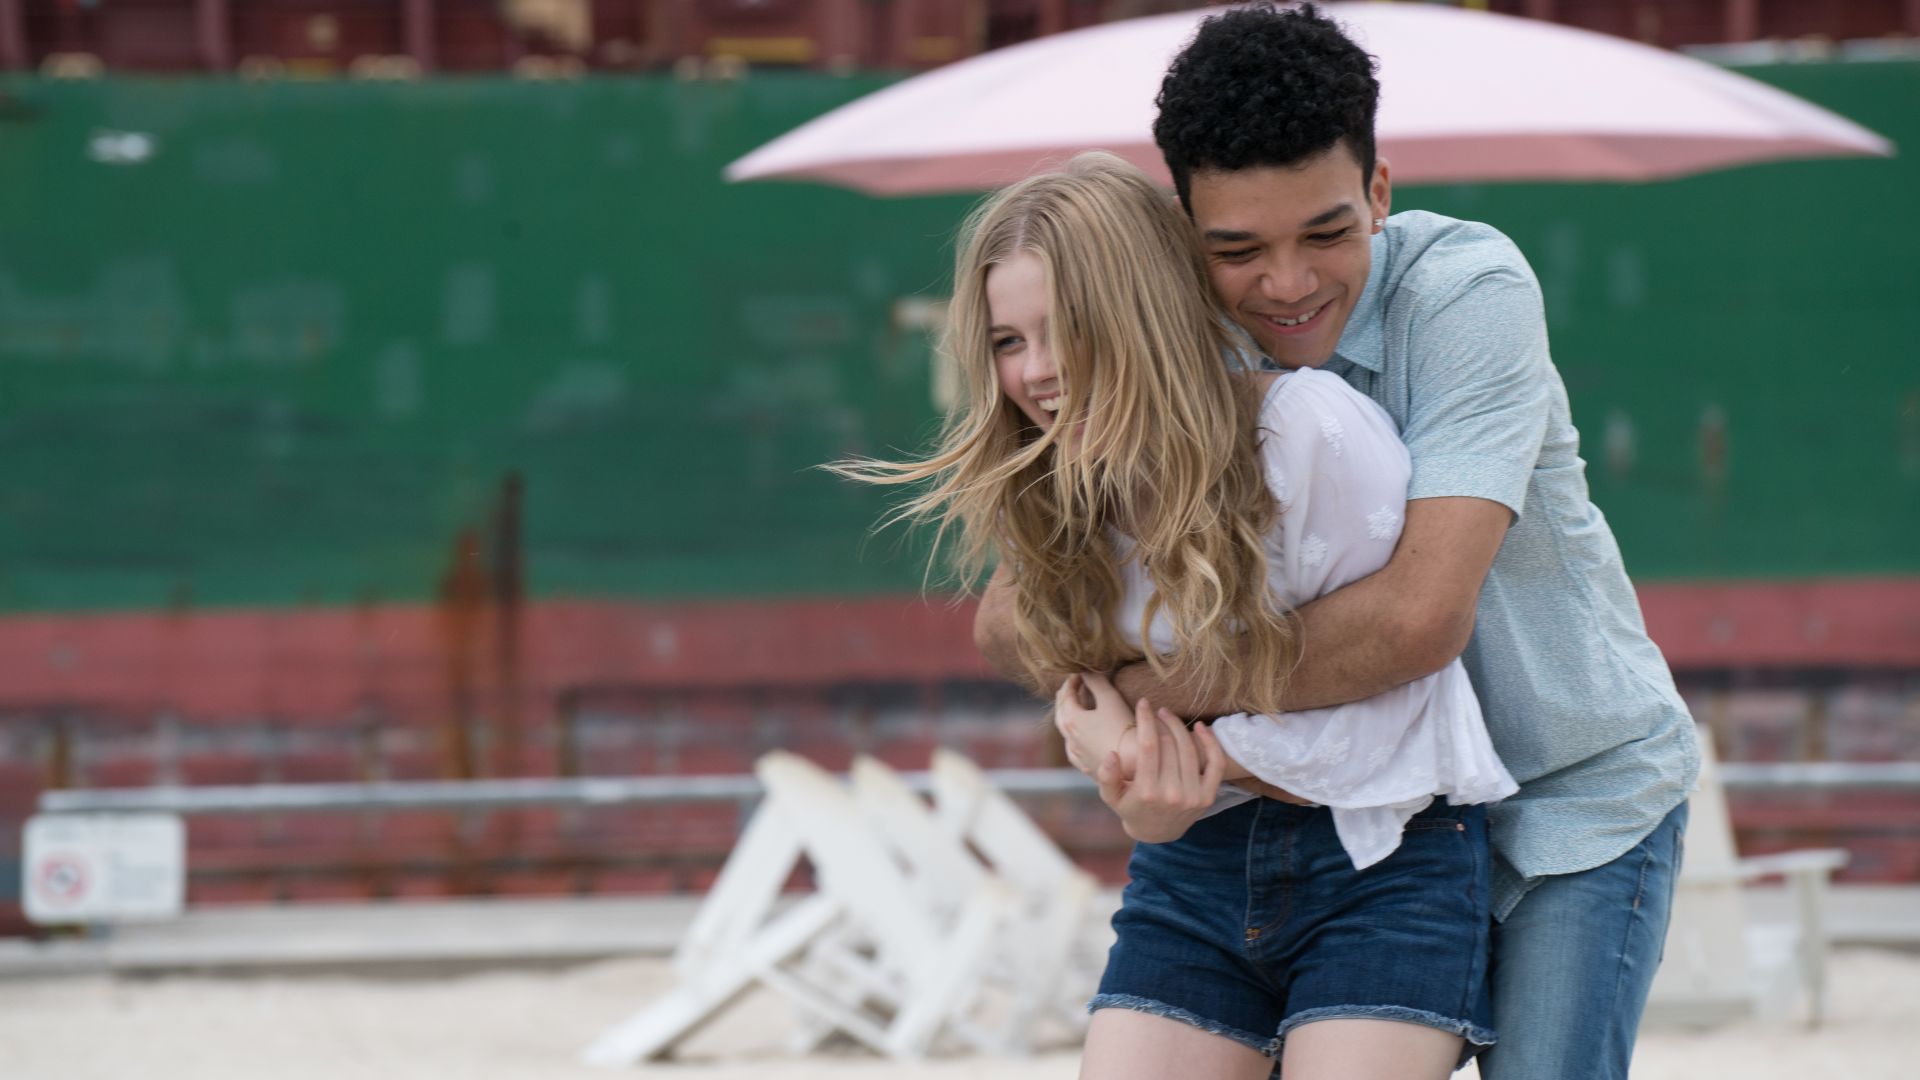 Every Day, Angourie Rice, Justice Smith, 8k (horizontal)